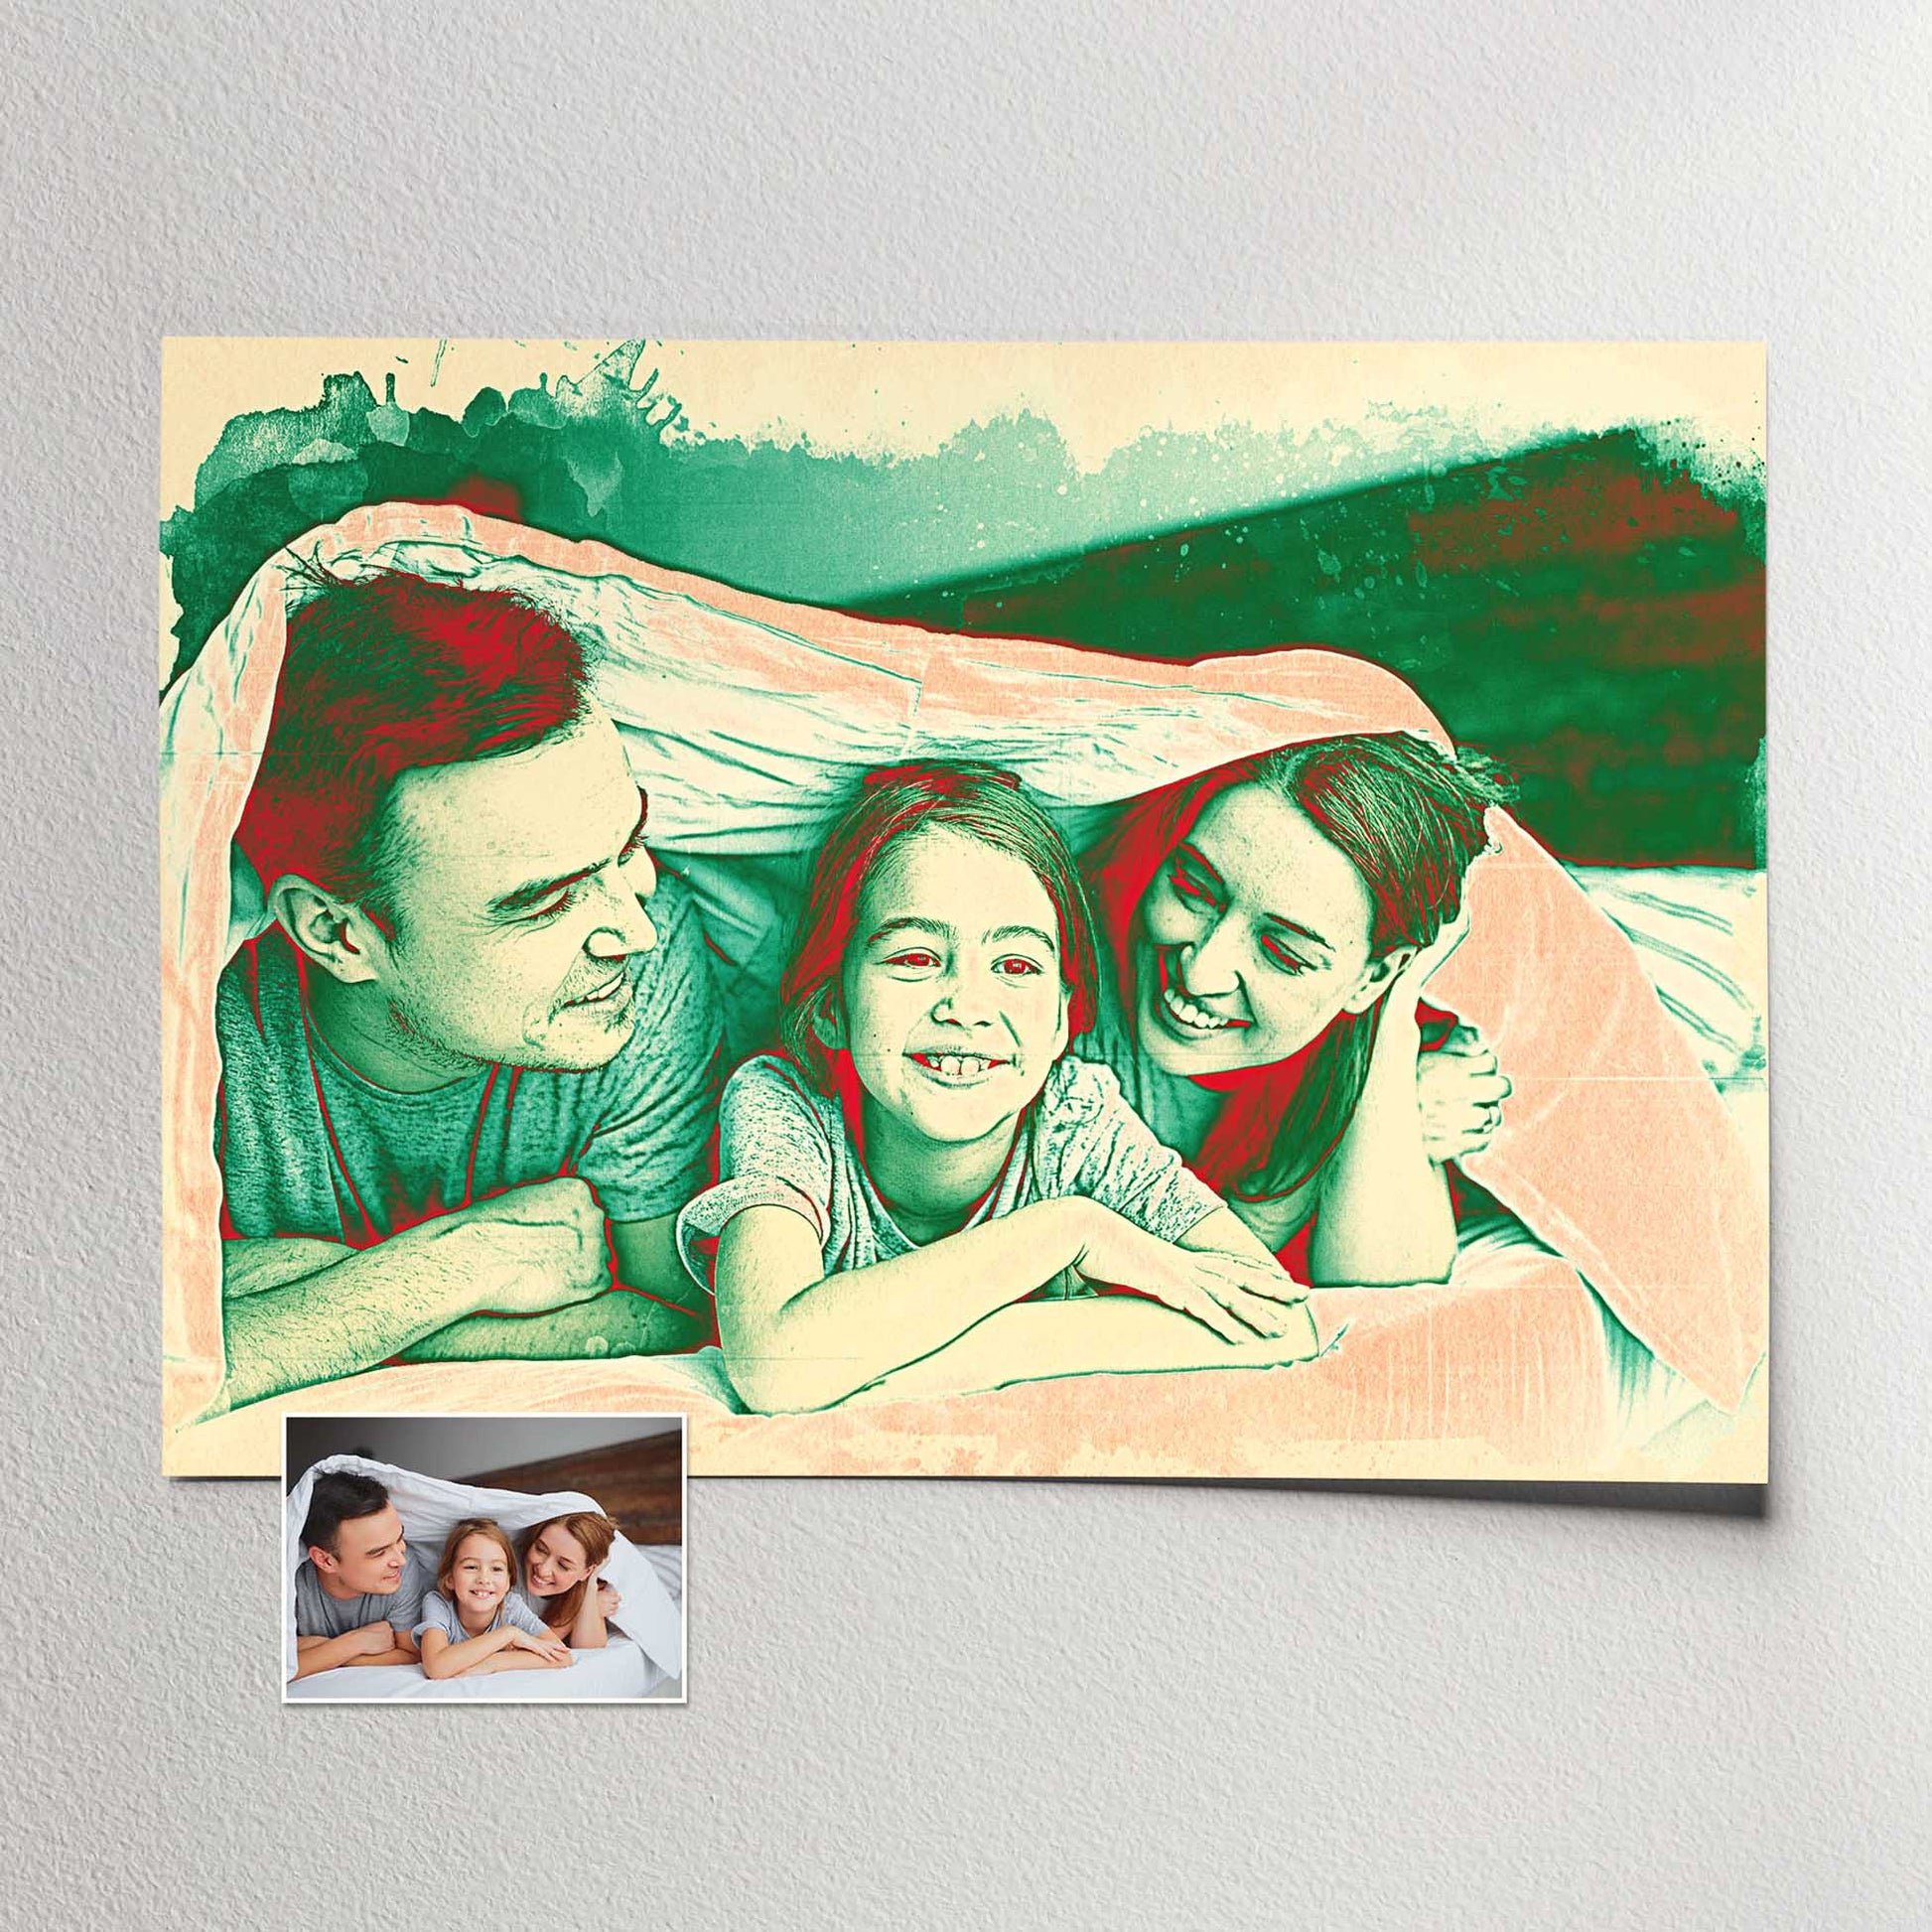 Introduce a touch of sophistication to your walls with our Personalised Green & Red Watercolor Print. This exquisite artwork, meticulously painted from your photo, beautifully captures the realistic watercolor style, showcasing green and red